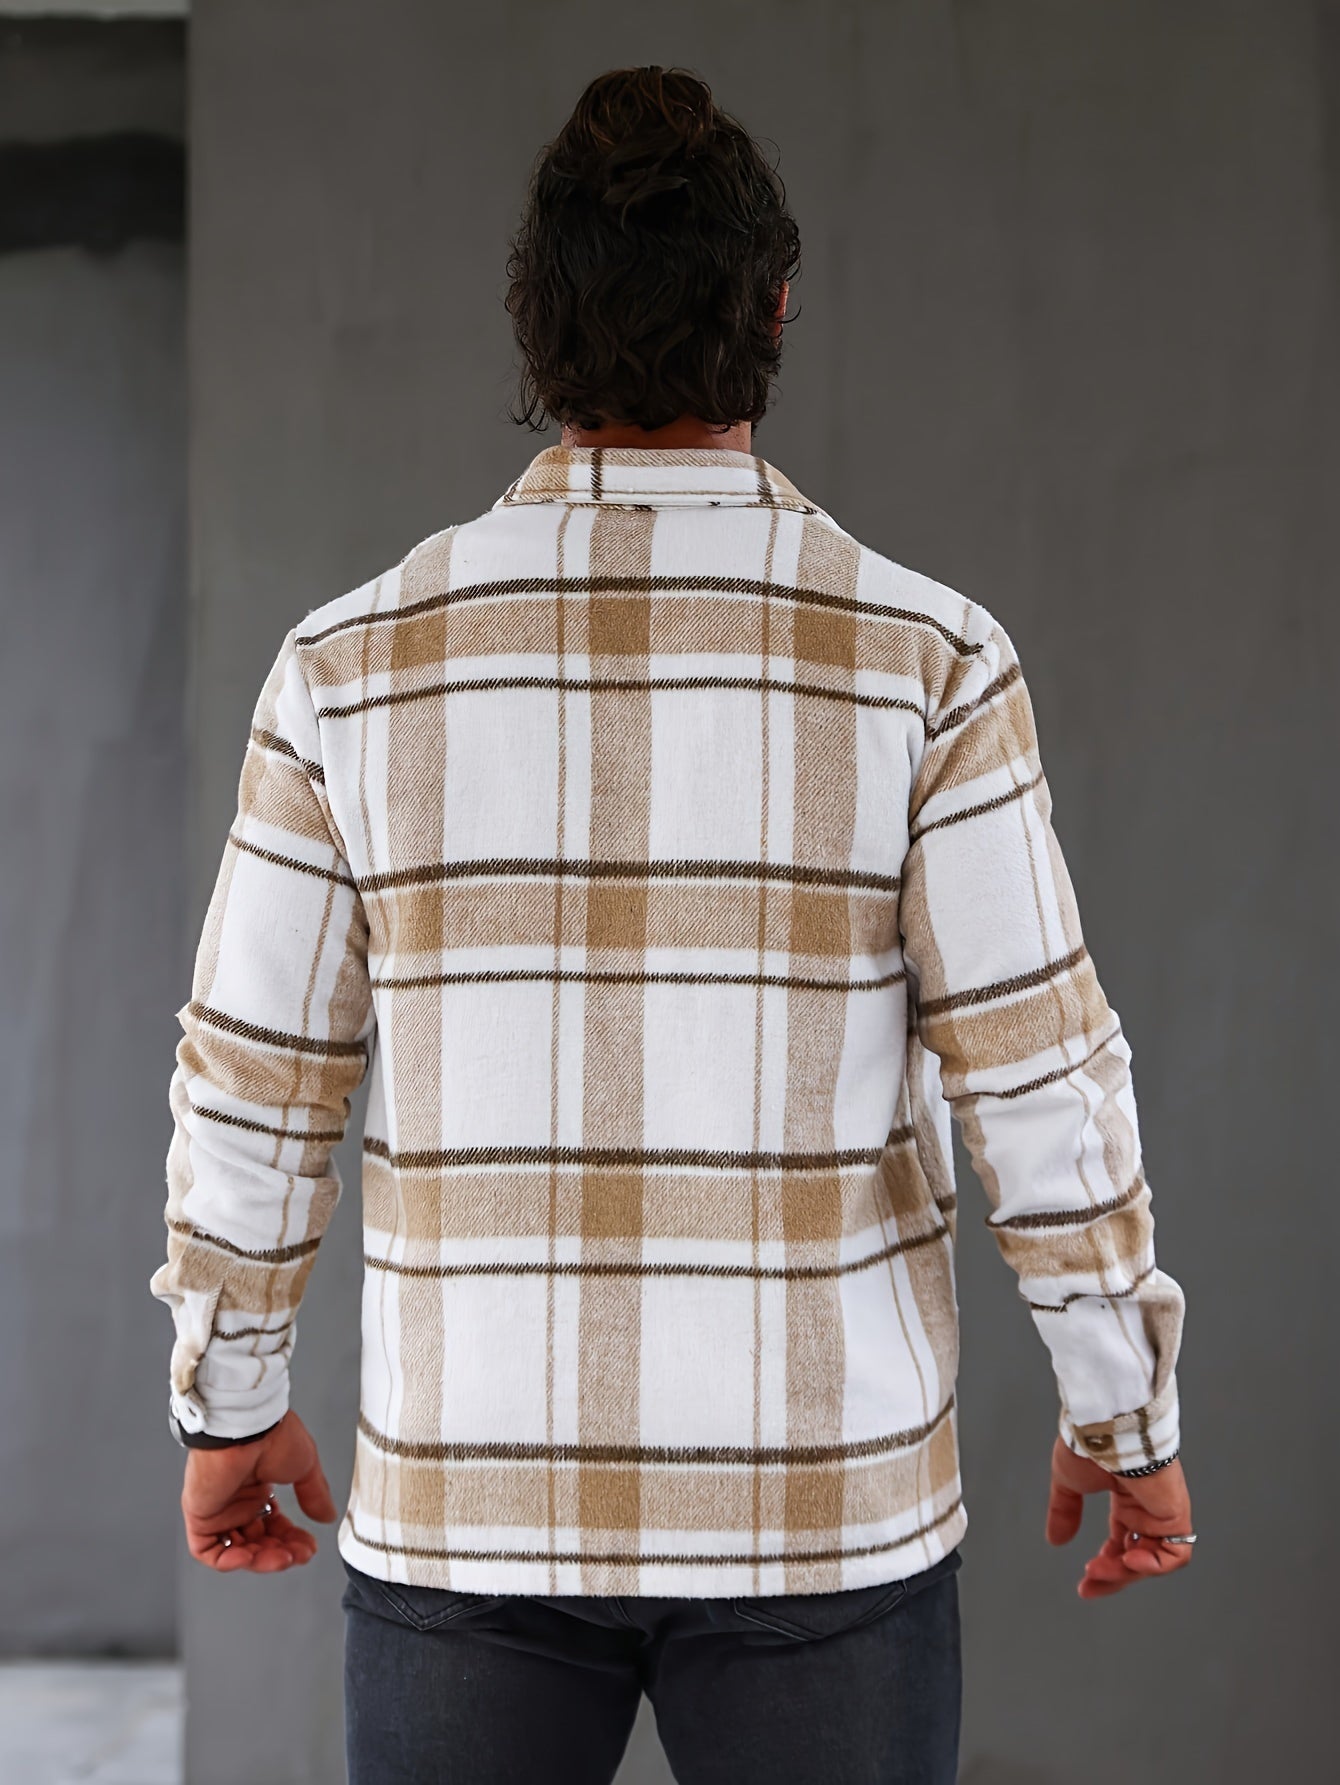 Men's Plaid Lapel Jacket for Casual and Streetwear - Long Sleeve, Button Closure